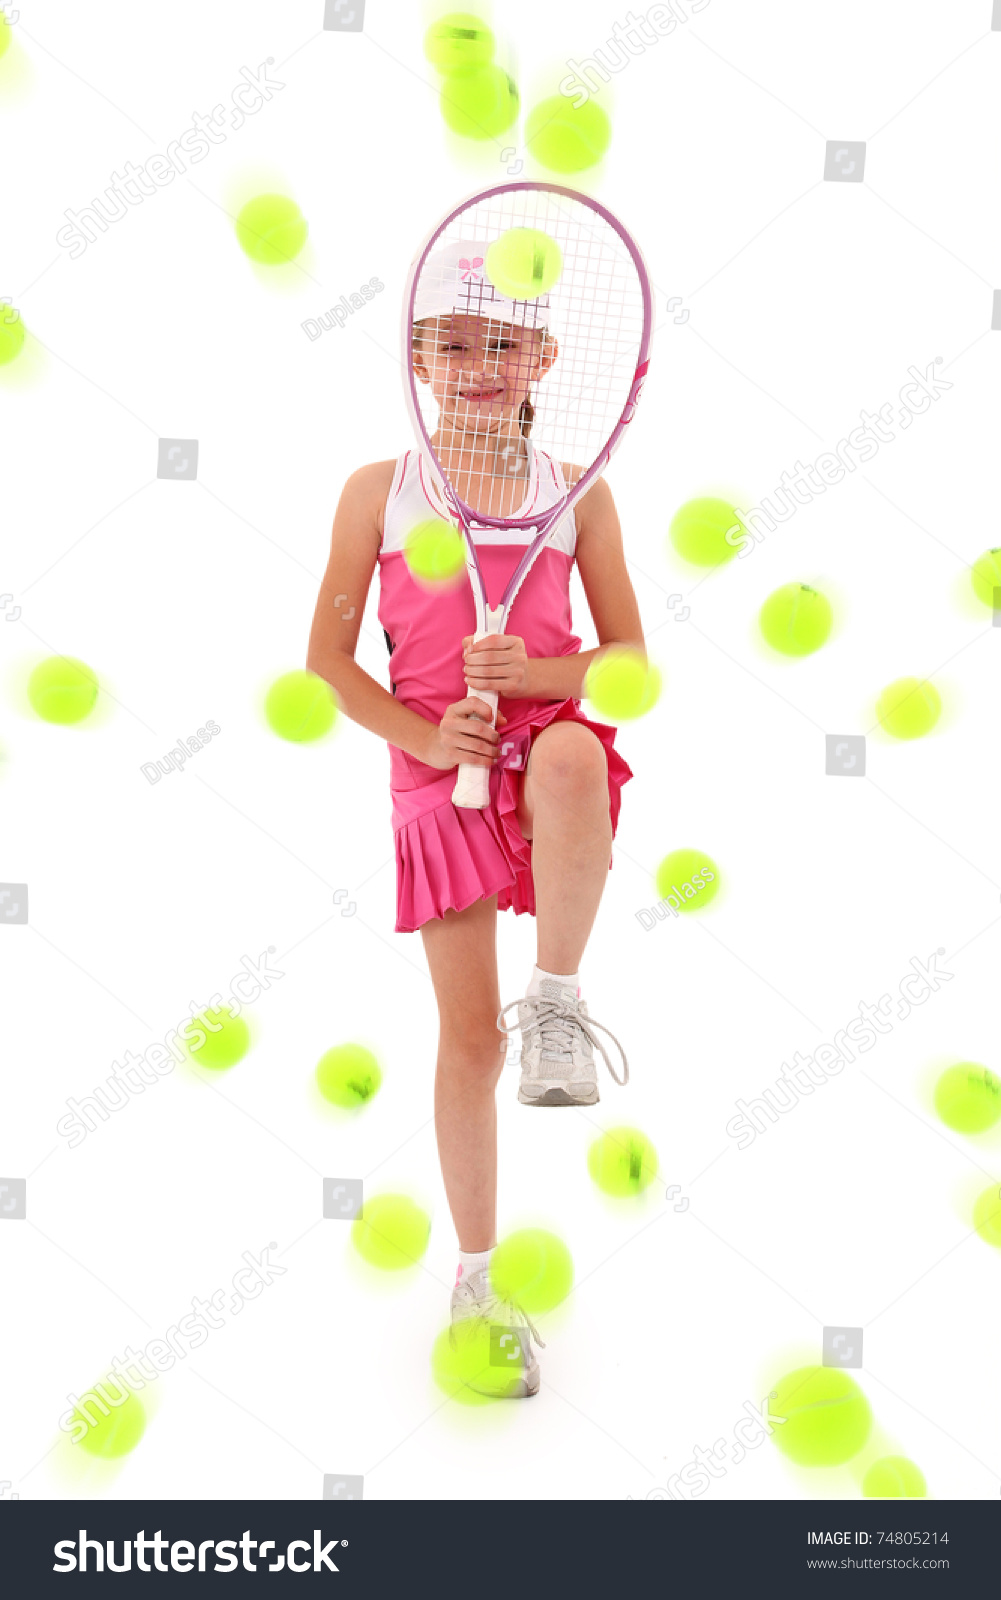 Adorable Seven Year Old Caucasian Girl In Tennis Uniform Defending Herself With Racquet Being